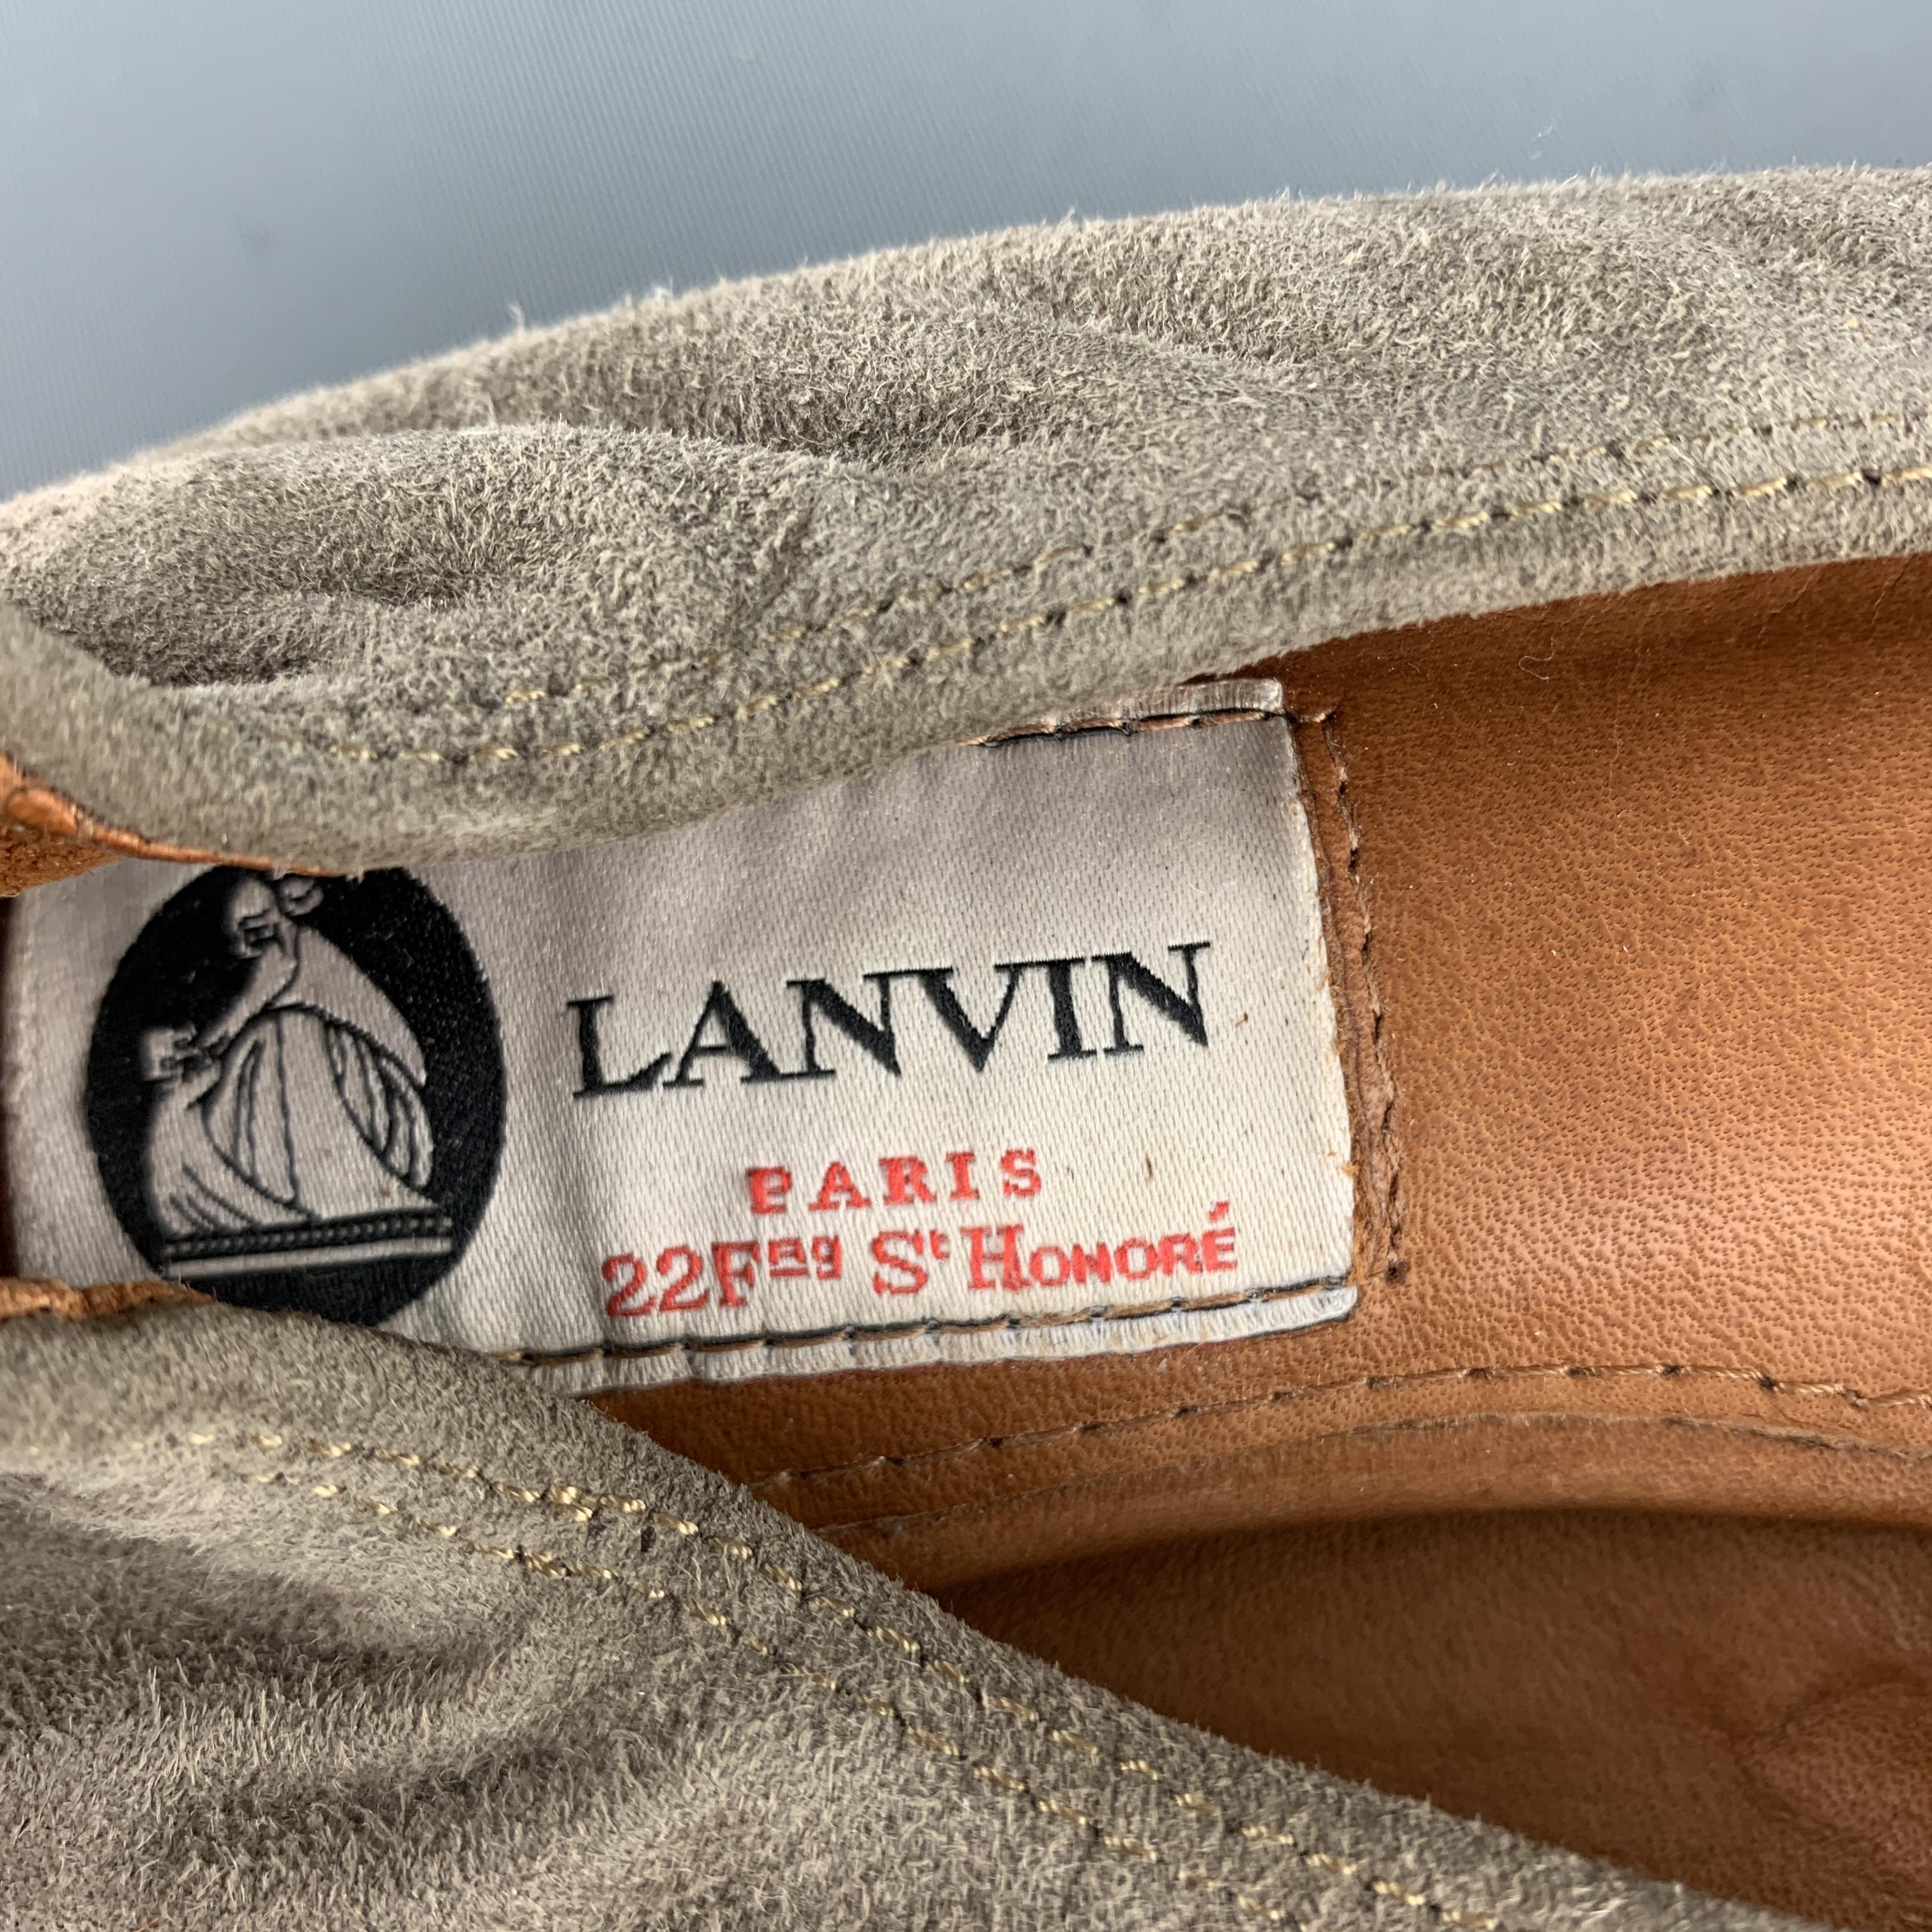 Women's LANVIN Size 6 Taupe Suede Patent Leather Toe Cap Flats